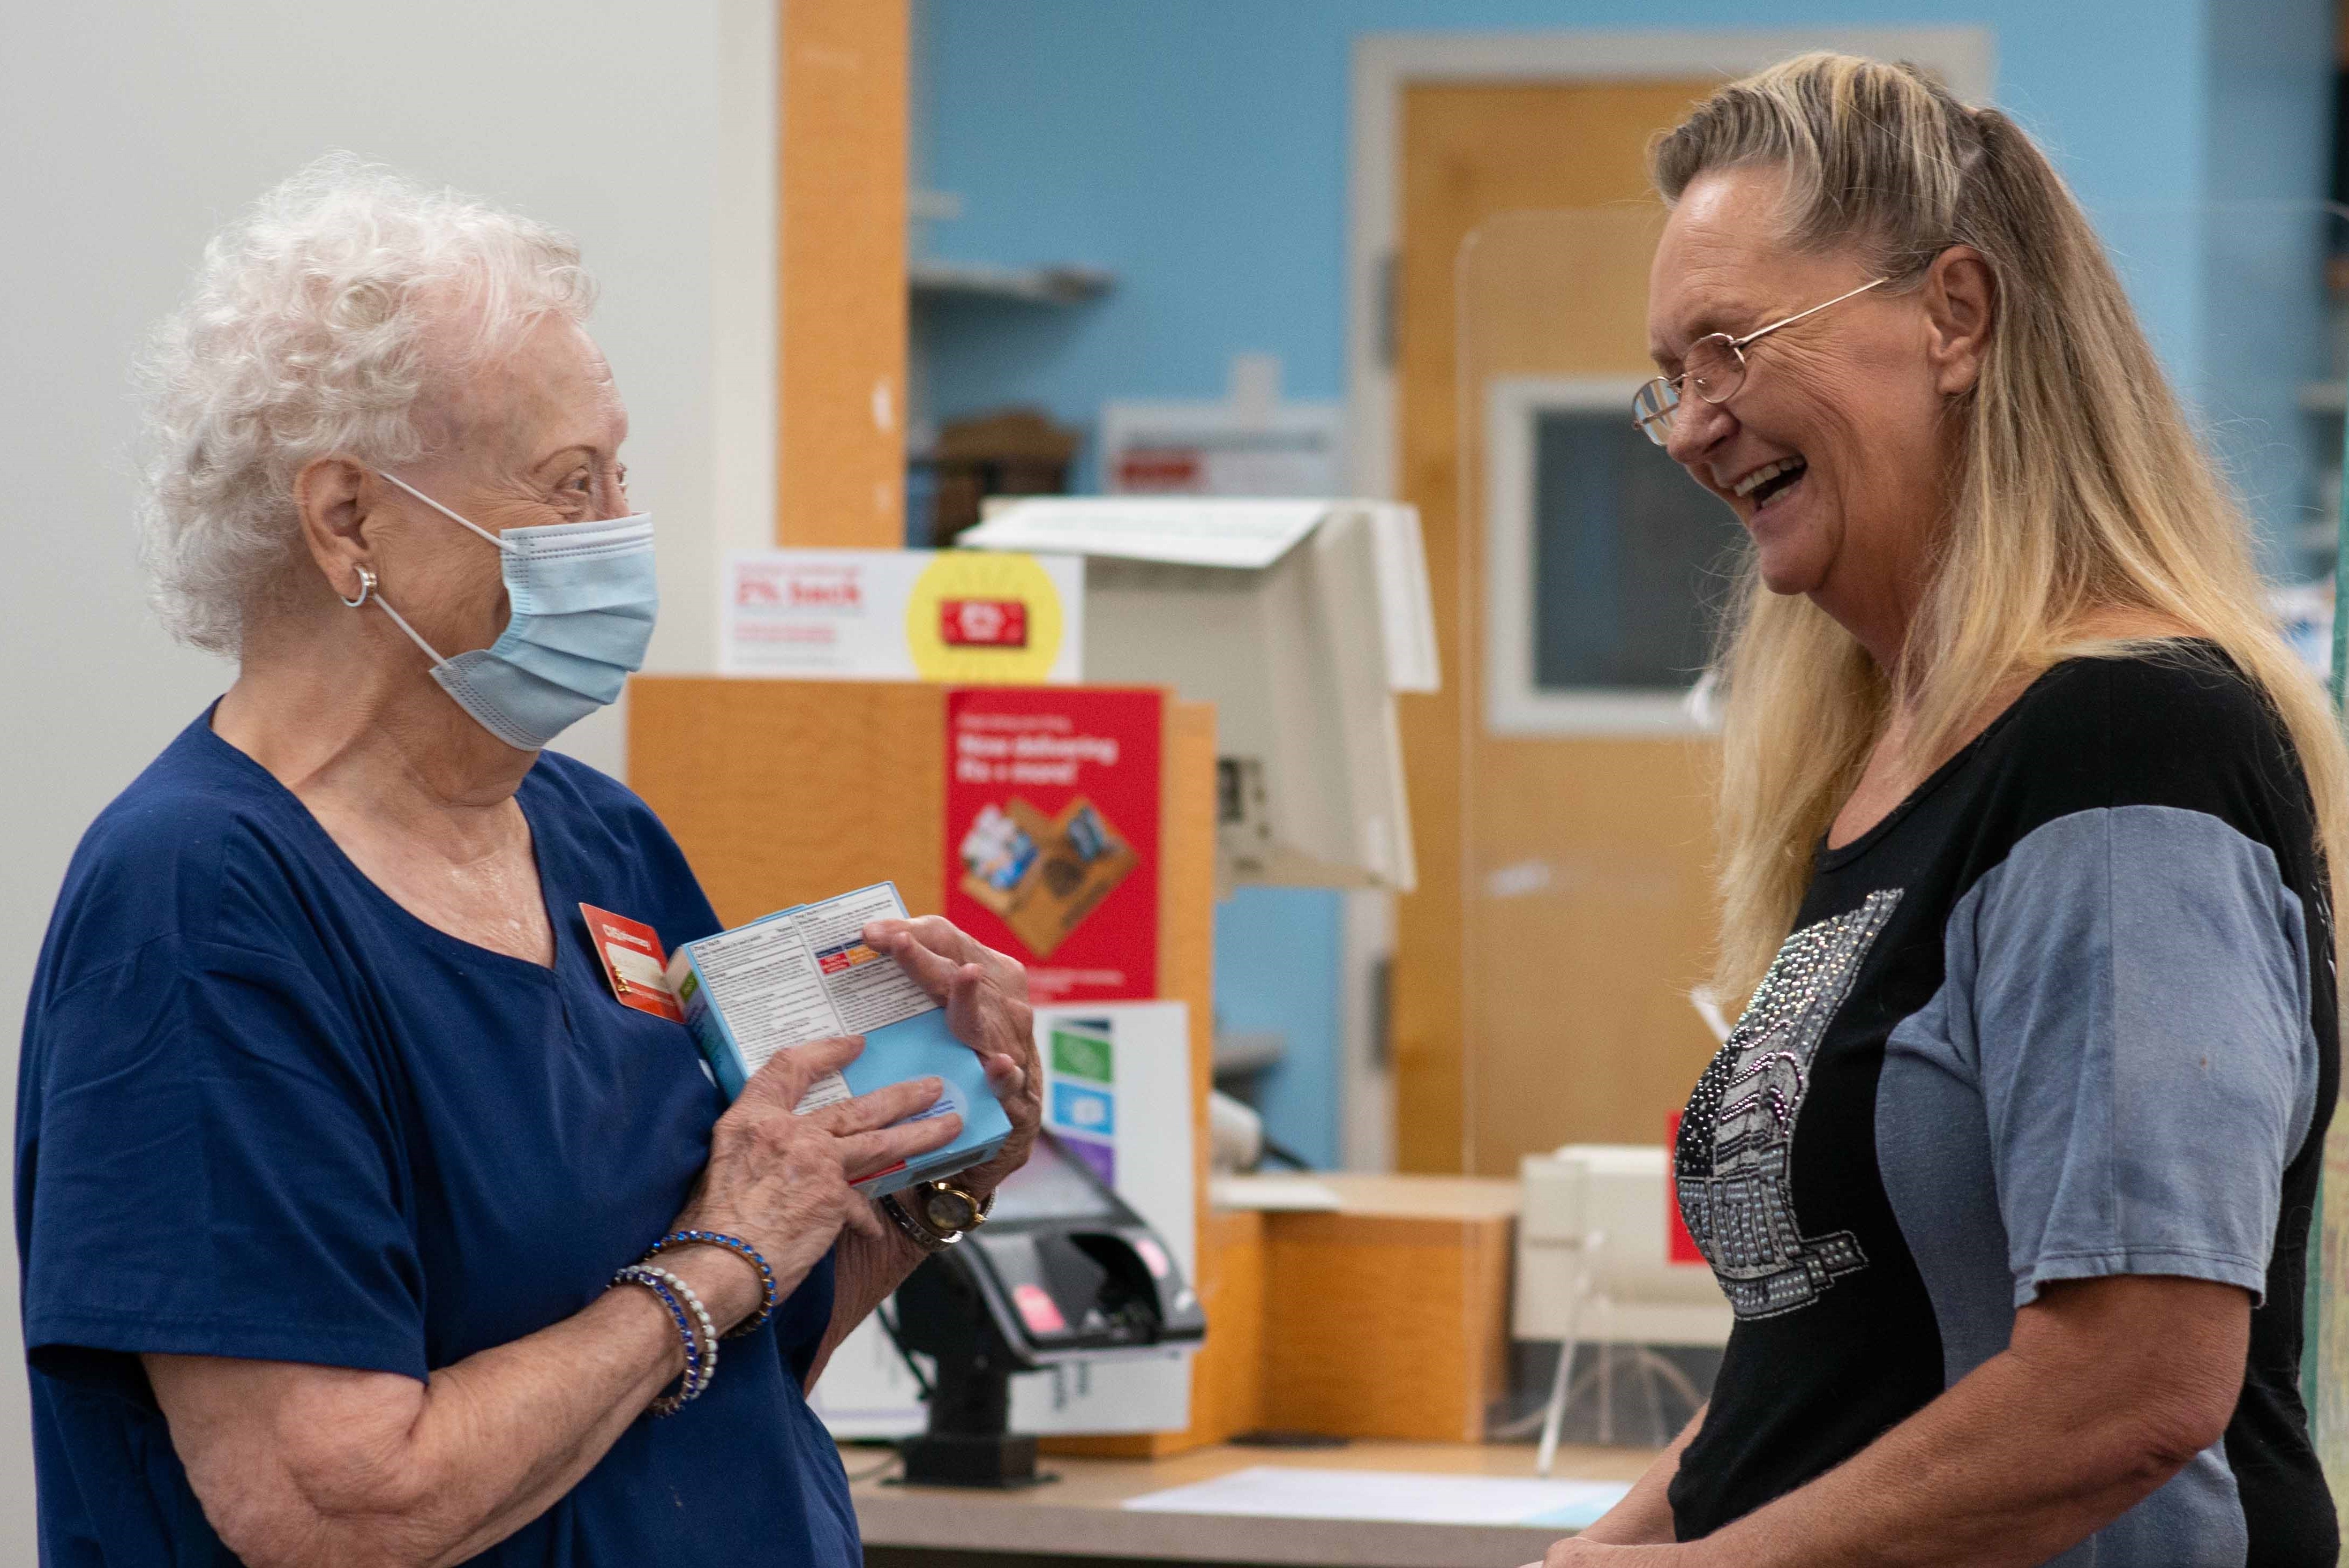 Mary Nolen, a long-time CVS Pharmacy employee wears a mask while assisting a customer